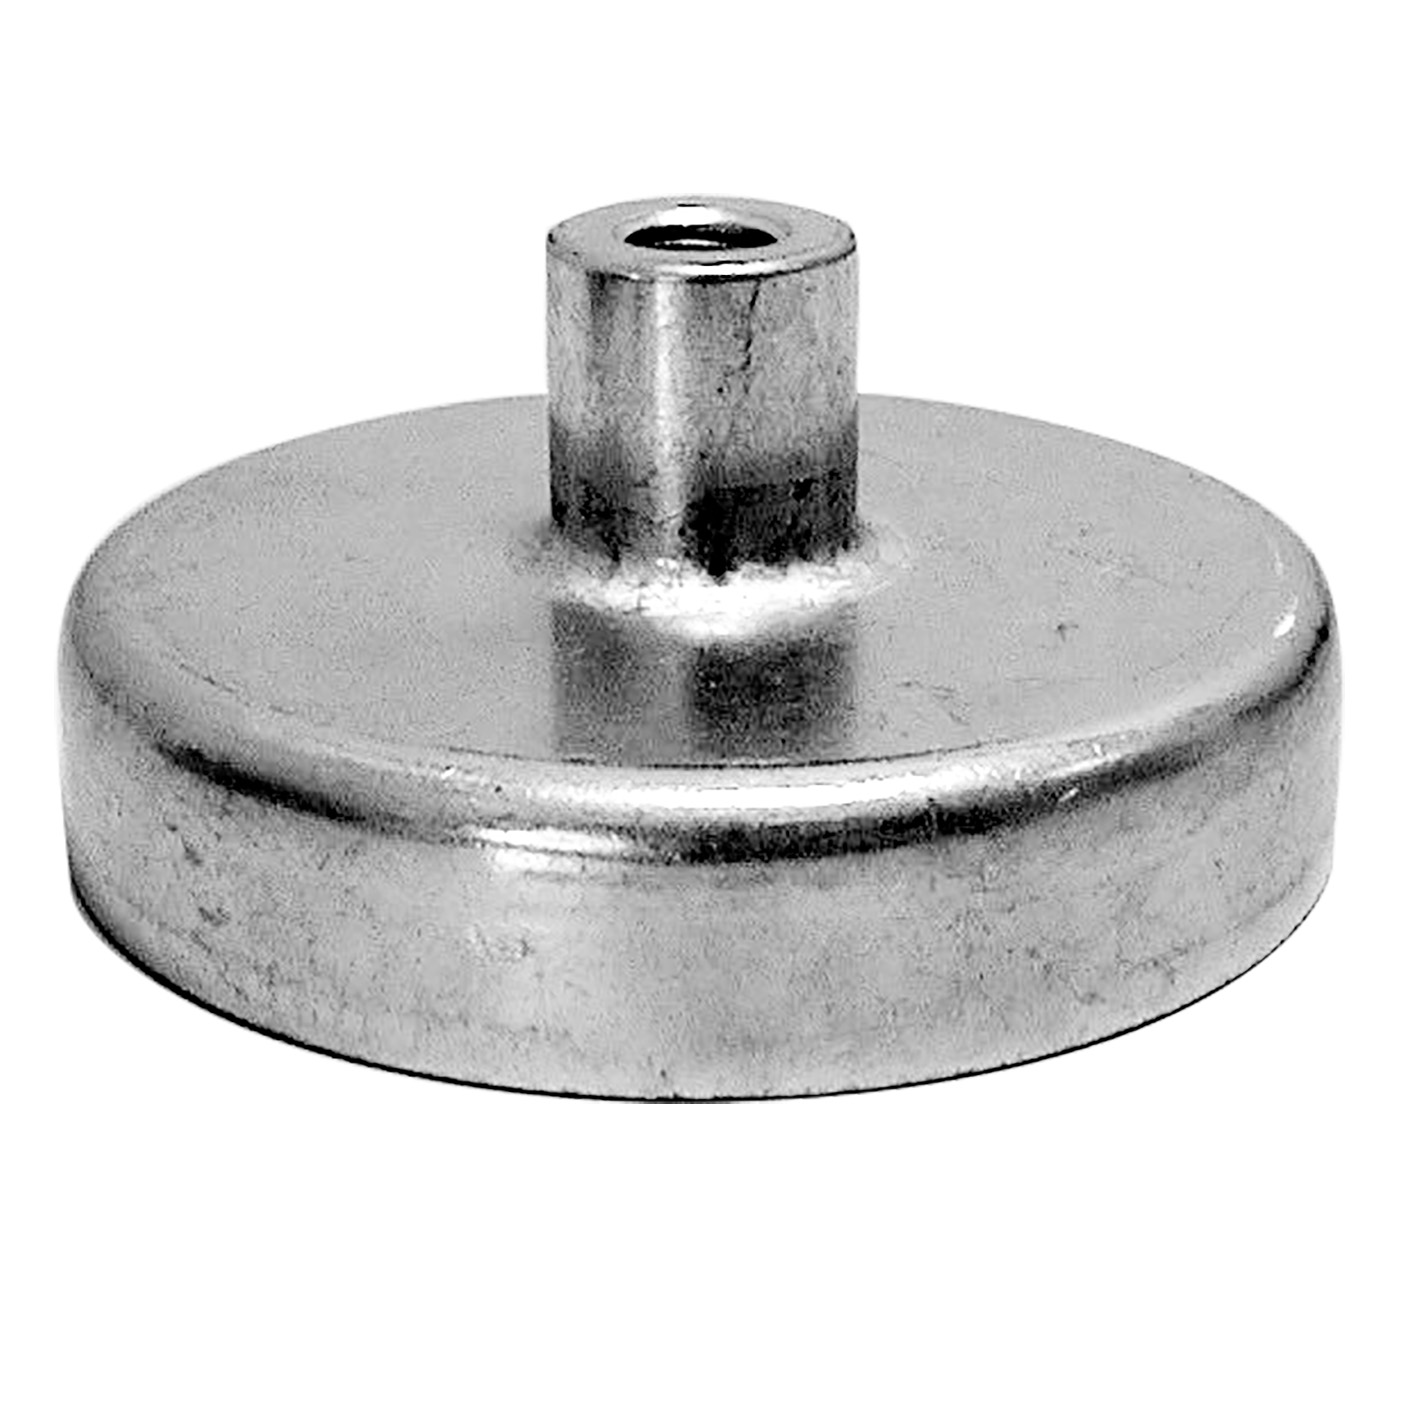 Magnetic stud with threaded hole - With threaded hole - SmCo - 